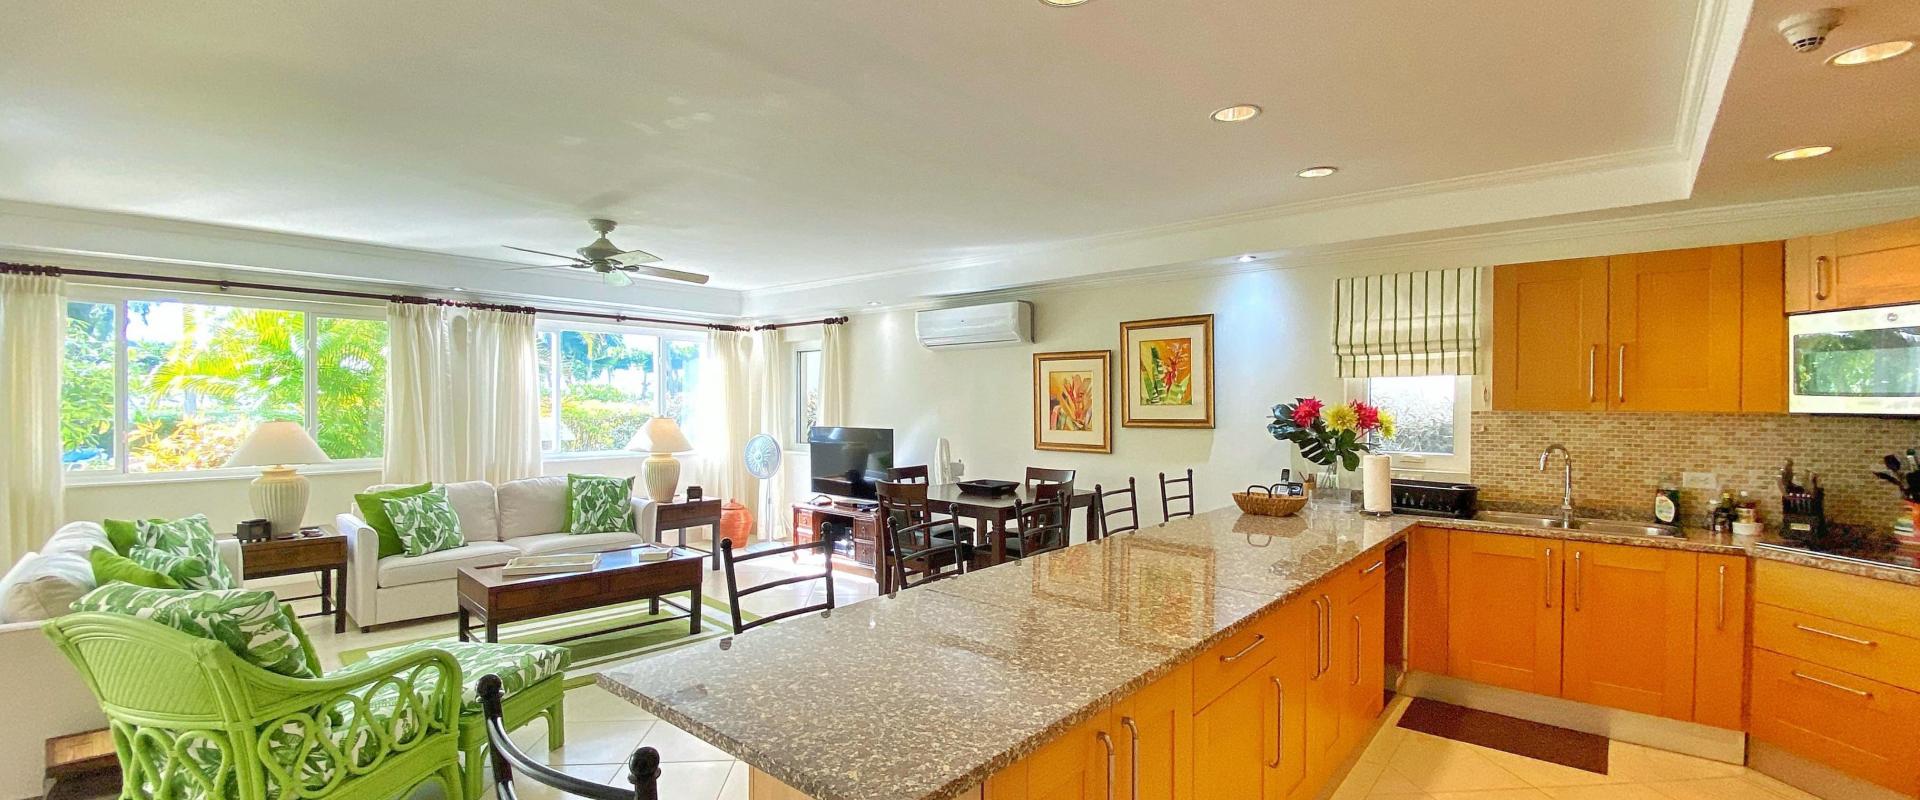 Palm Beach 211 Barbados Beachfront Vacation Condo Rental Open Plan Living Room and Kitchen